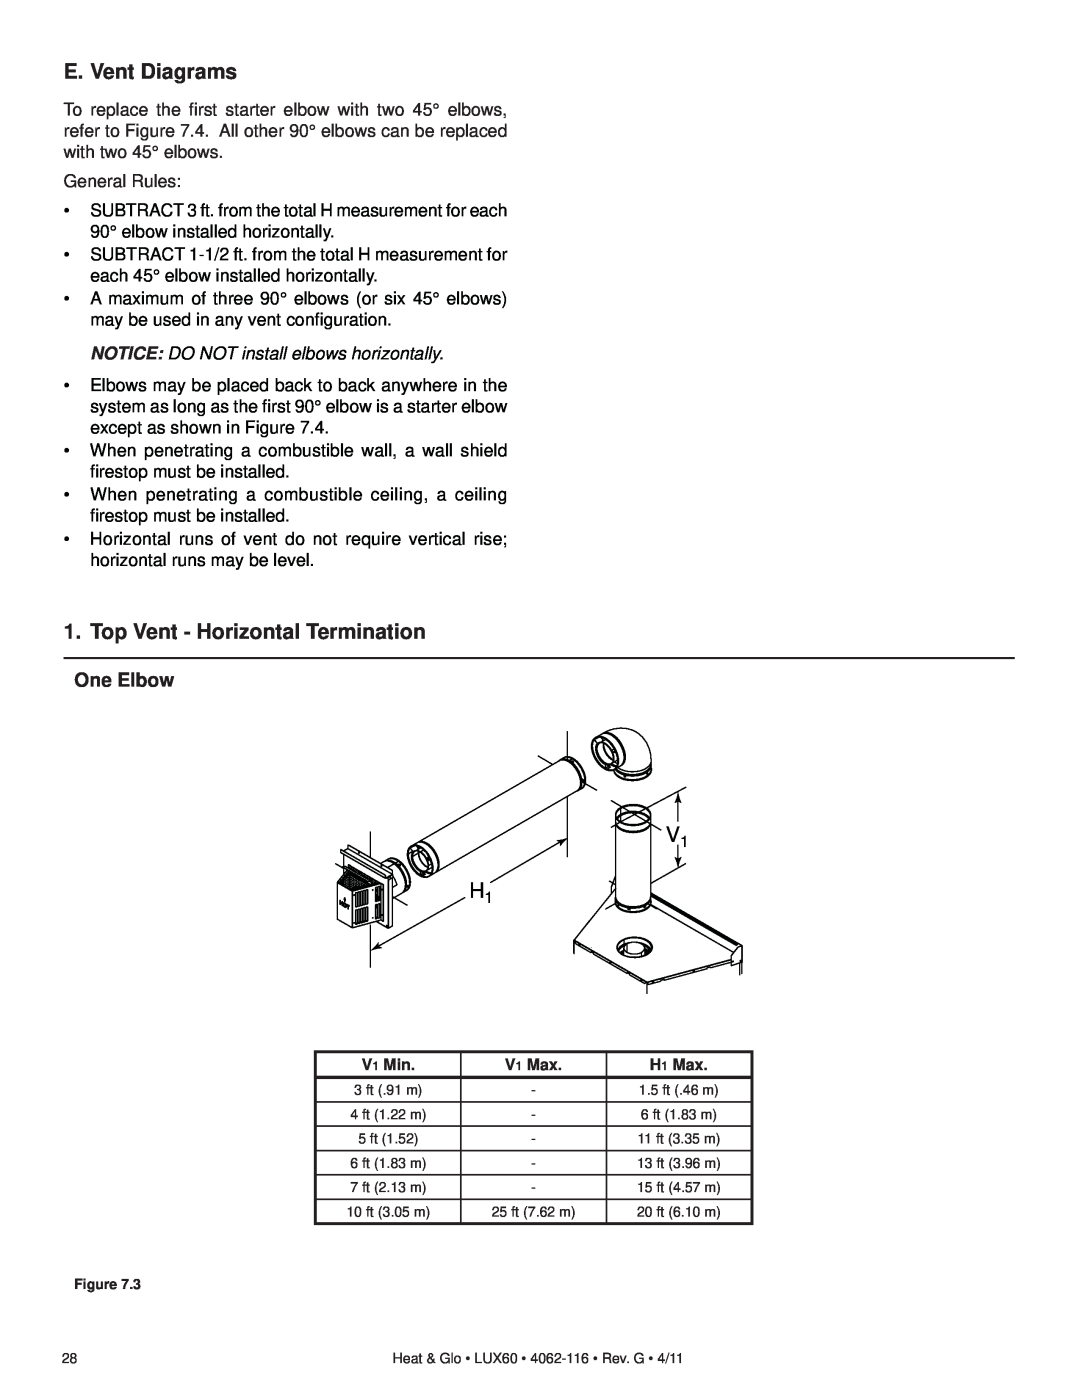 Heat & Glo LifeStyle LUX60 owner manual E. Vent Diagrams, Top Vent - Horizontal Termination, V1 H1, One Elbow 